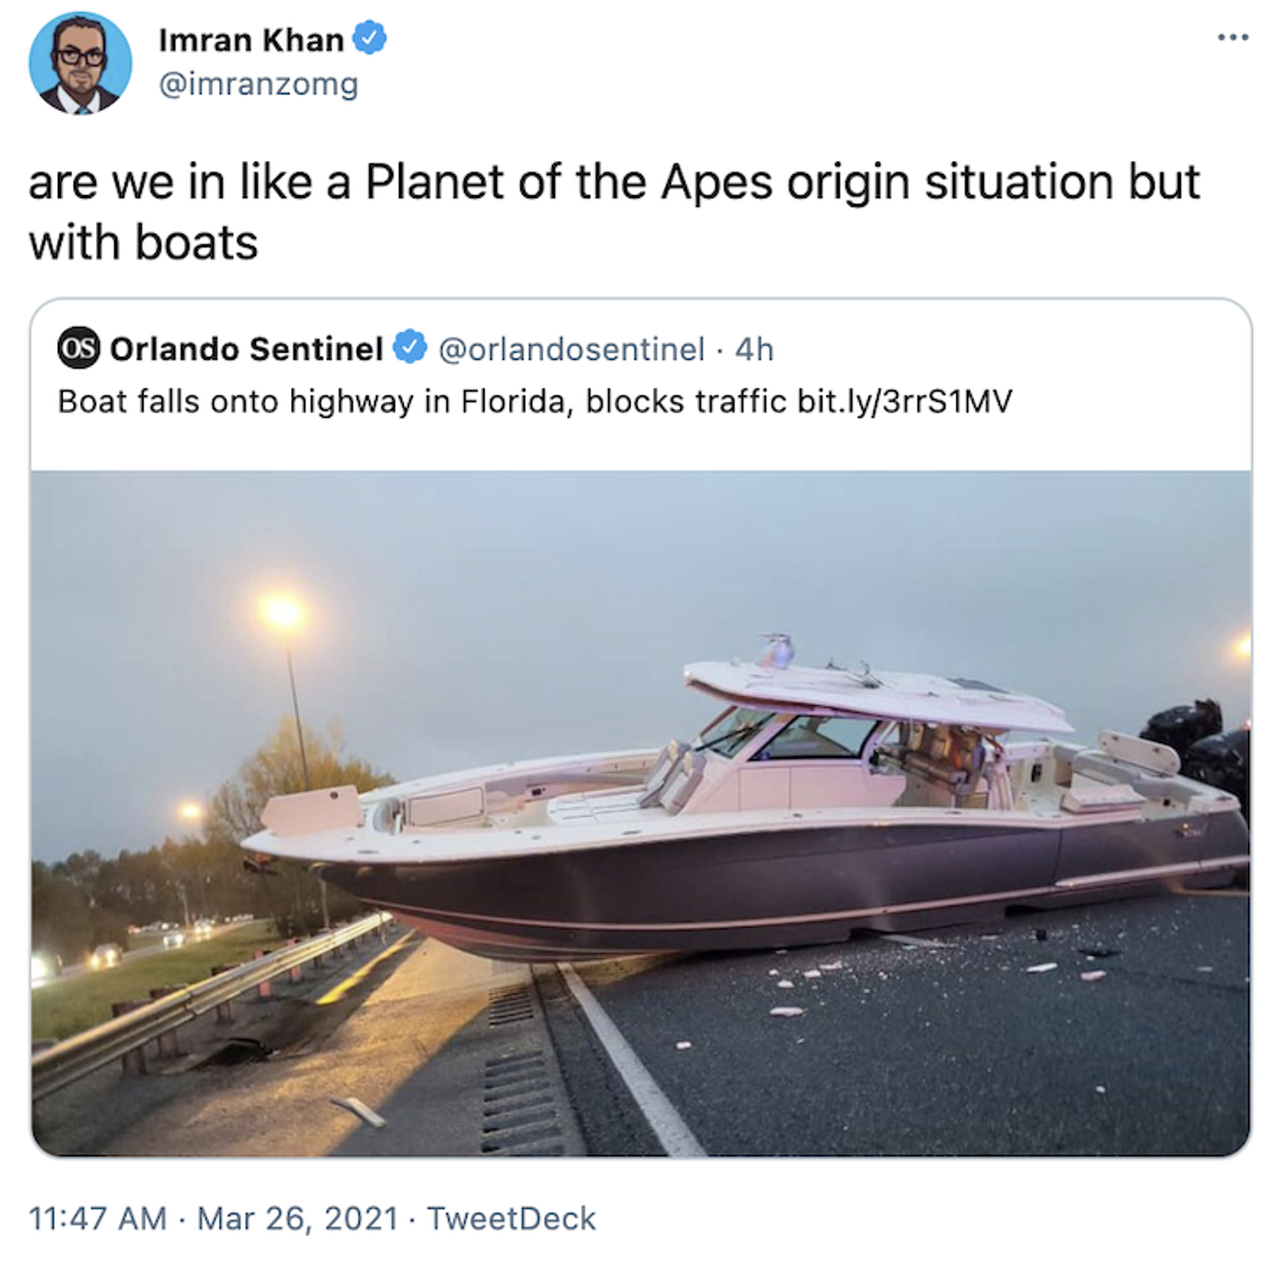 Everyone's roasting this Florida boat, which also got stuck somewhere inconvenient